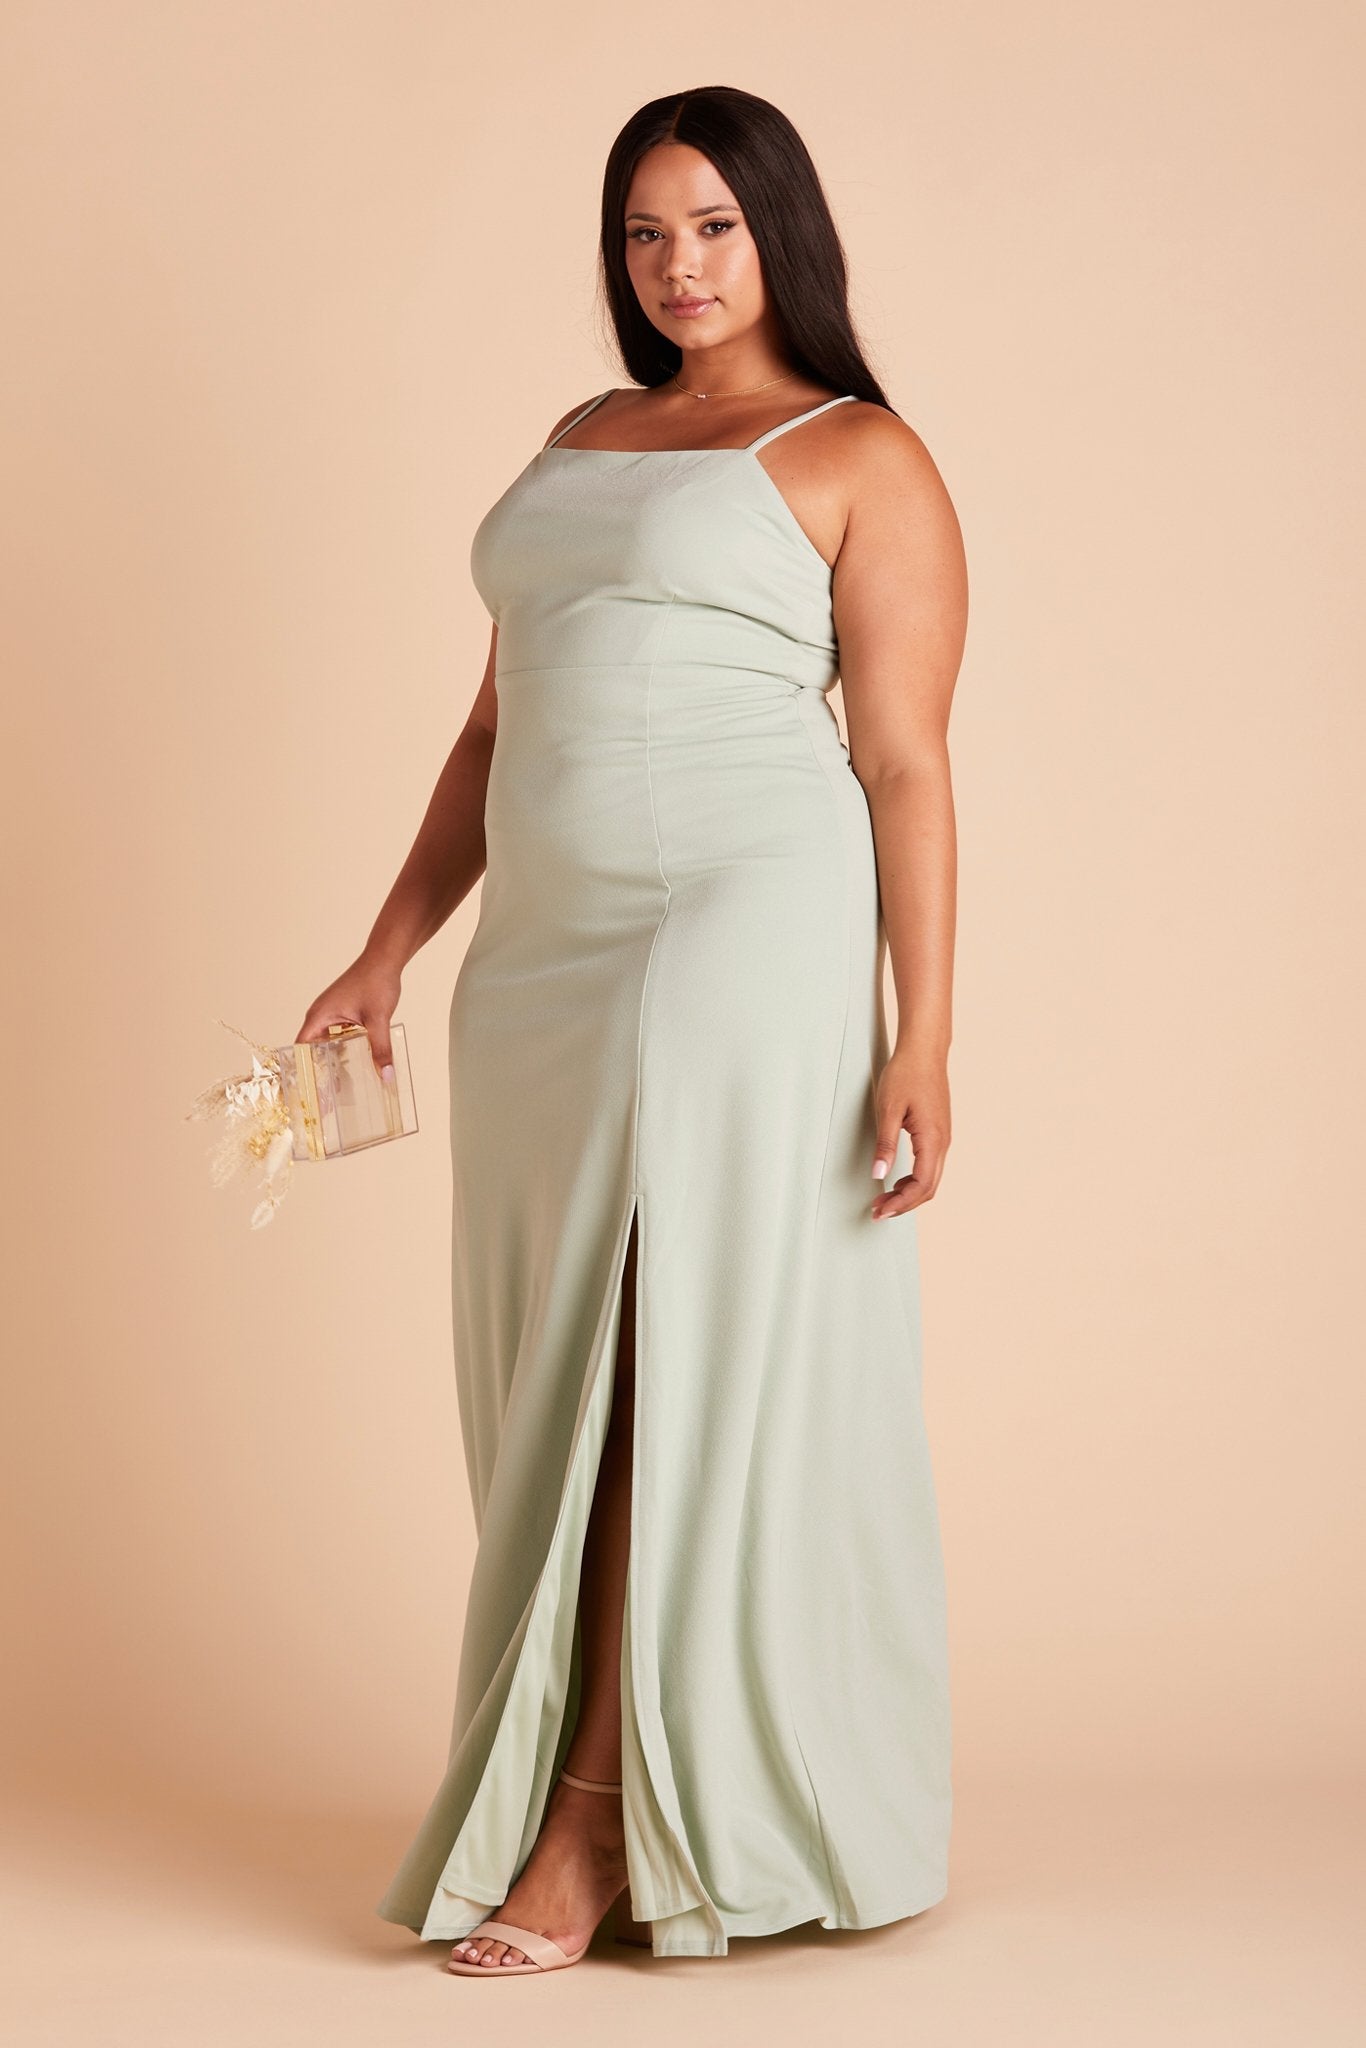 Benny plus size bridesmaid dress in sage green crepe by Birdy Grey, side view